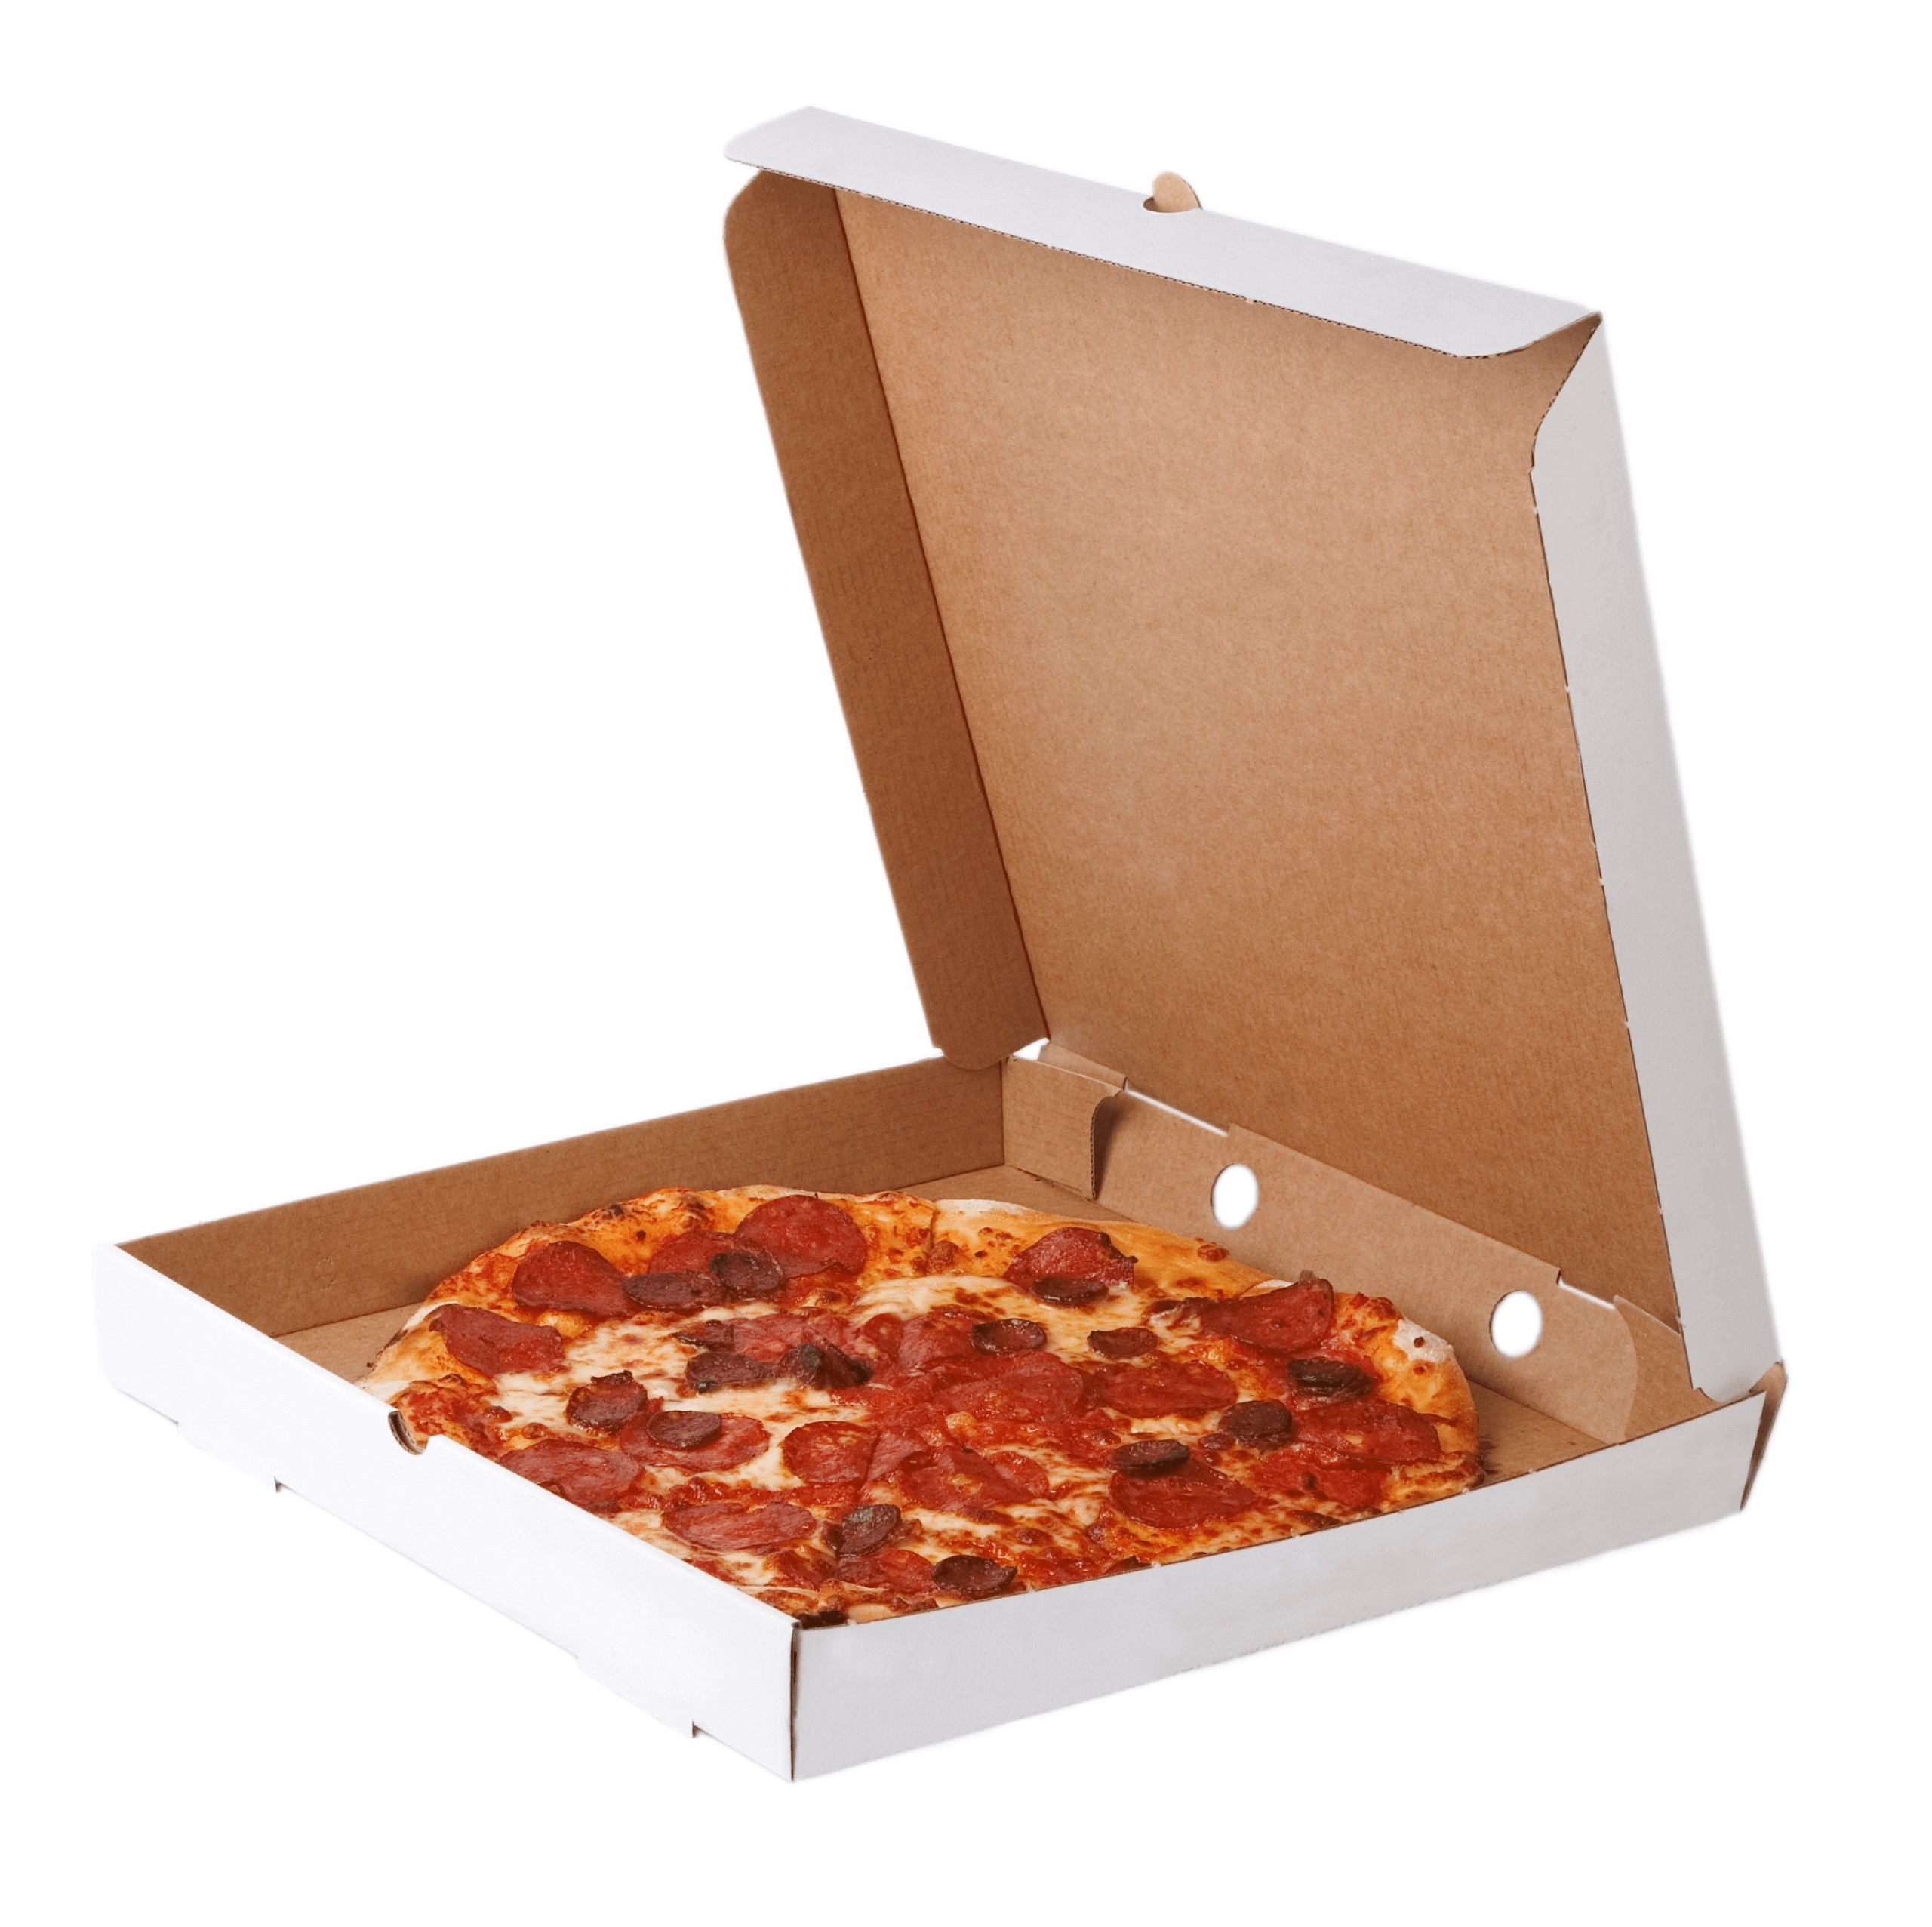 An image of a pizza delivery box.